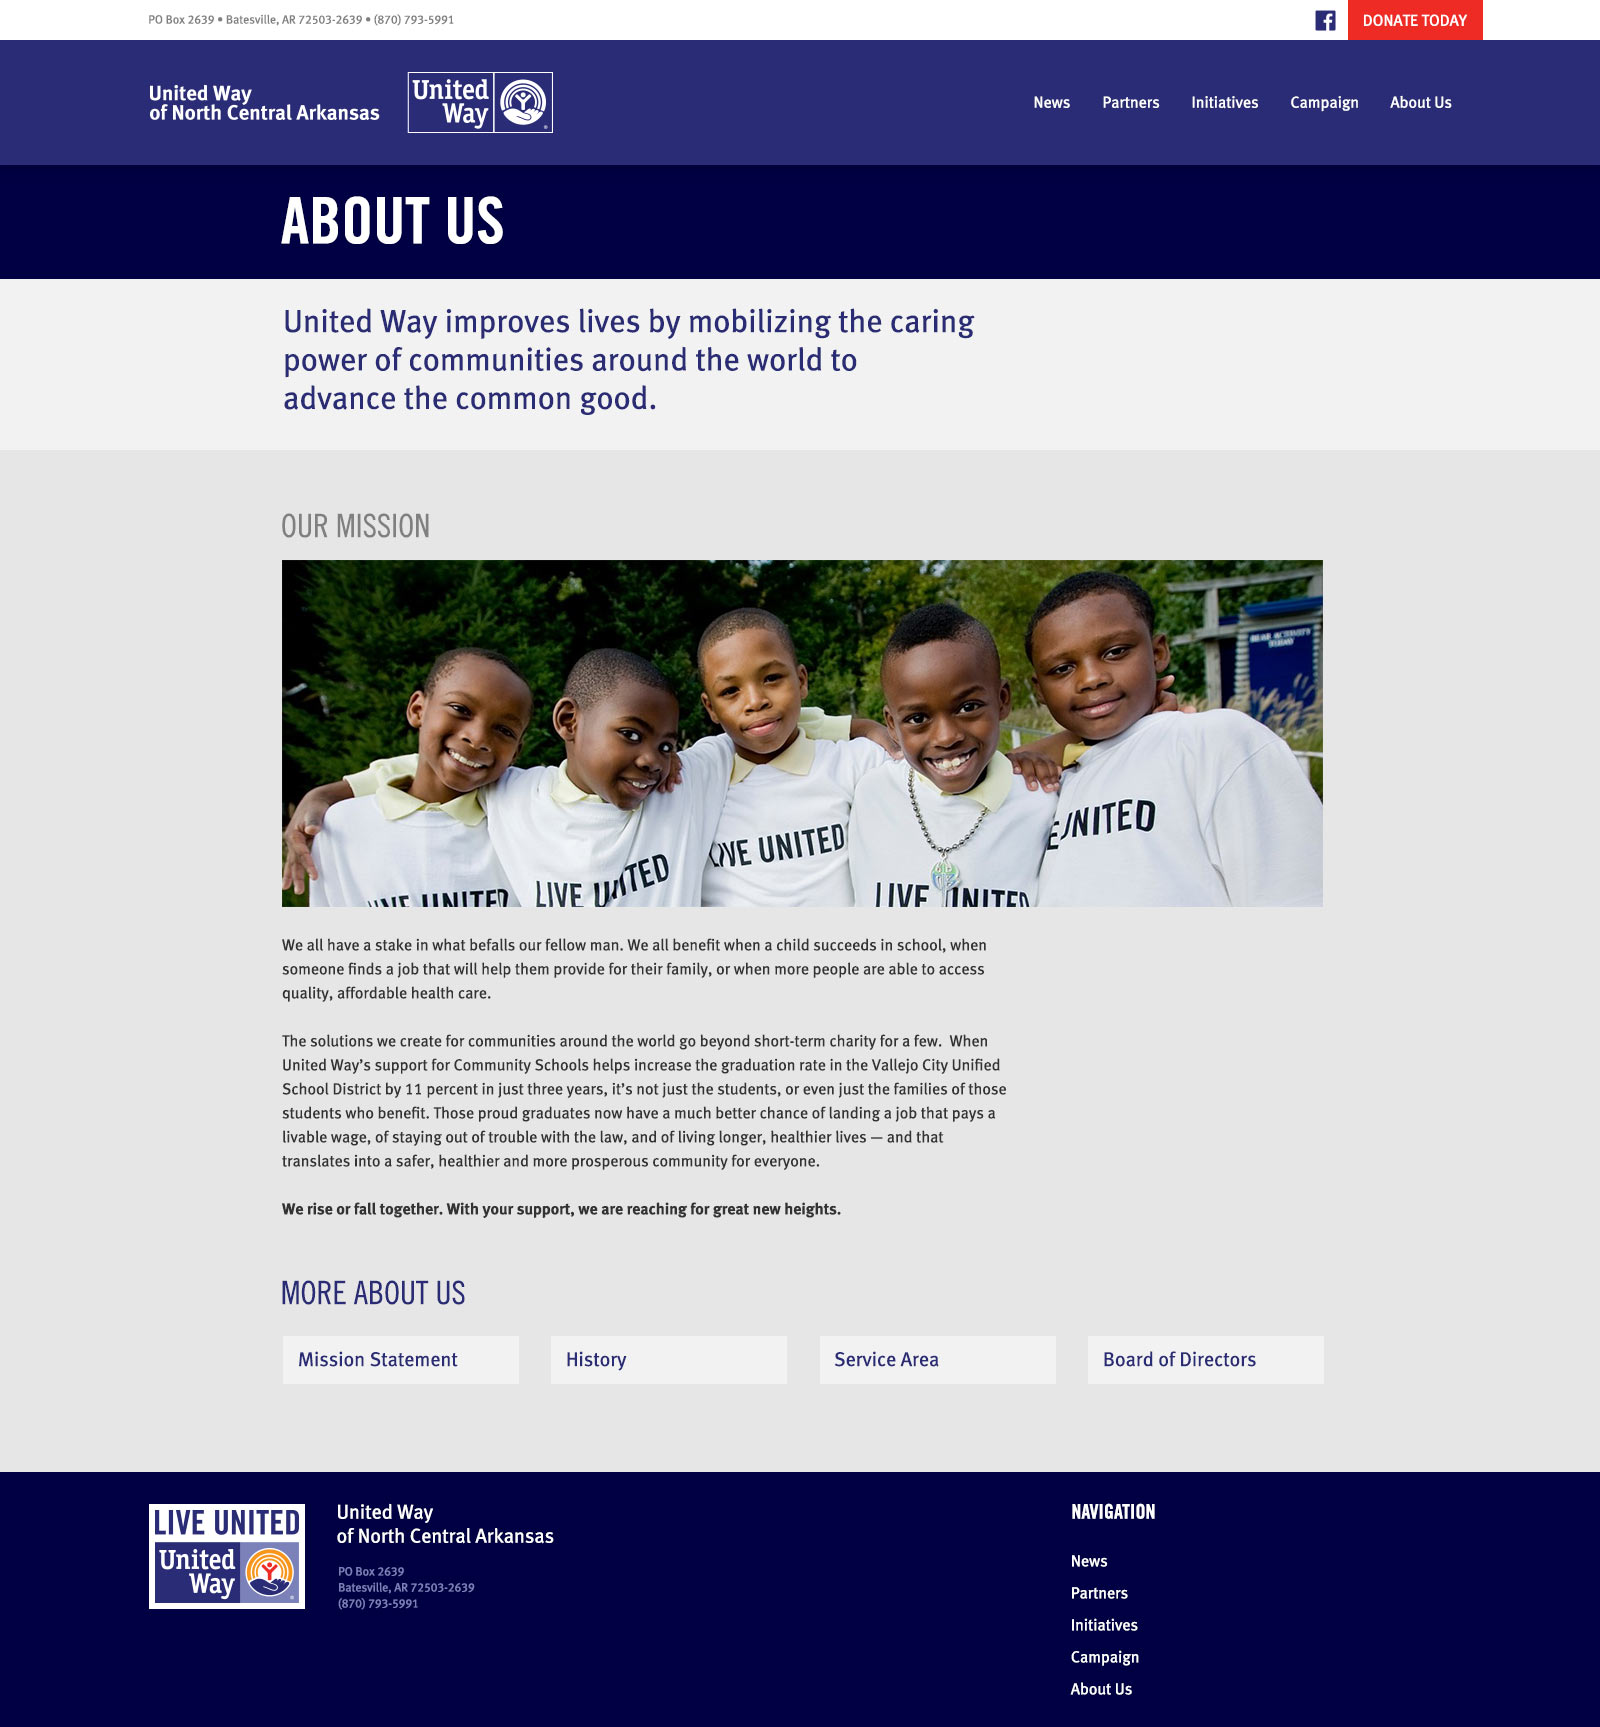 United Way of North Central Arkansas website, About Us interior page